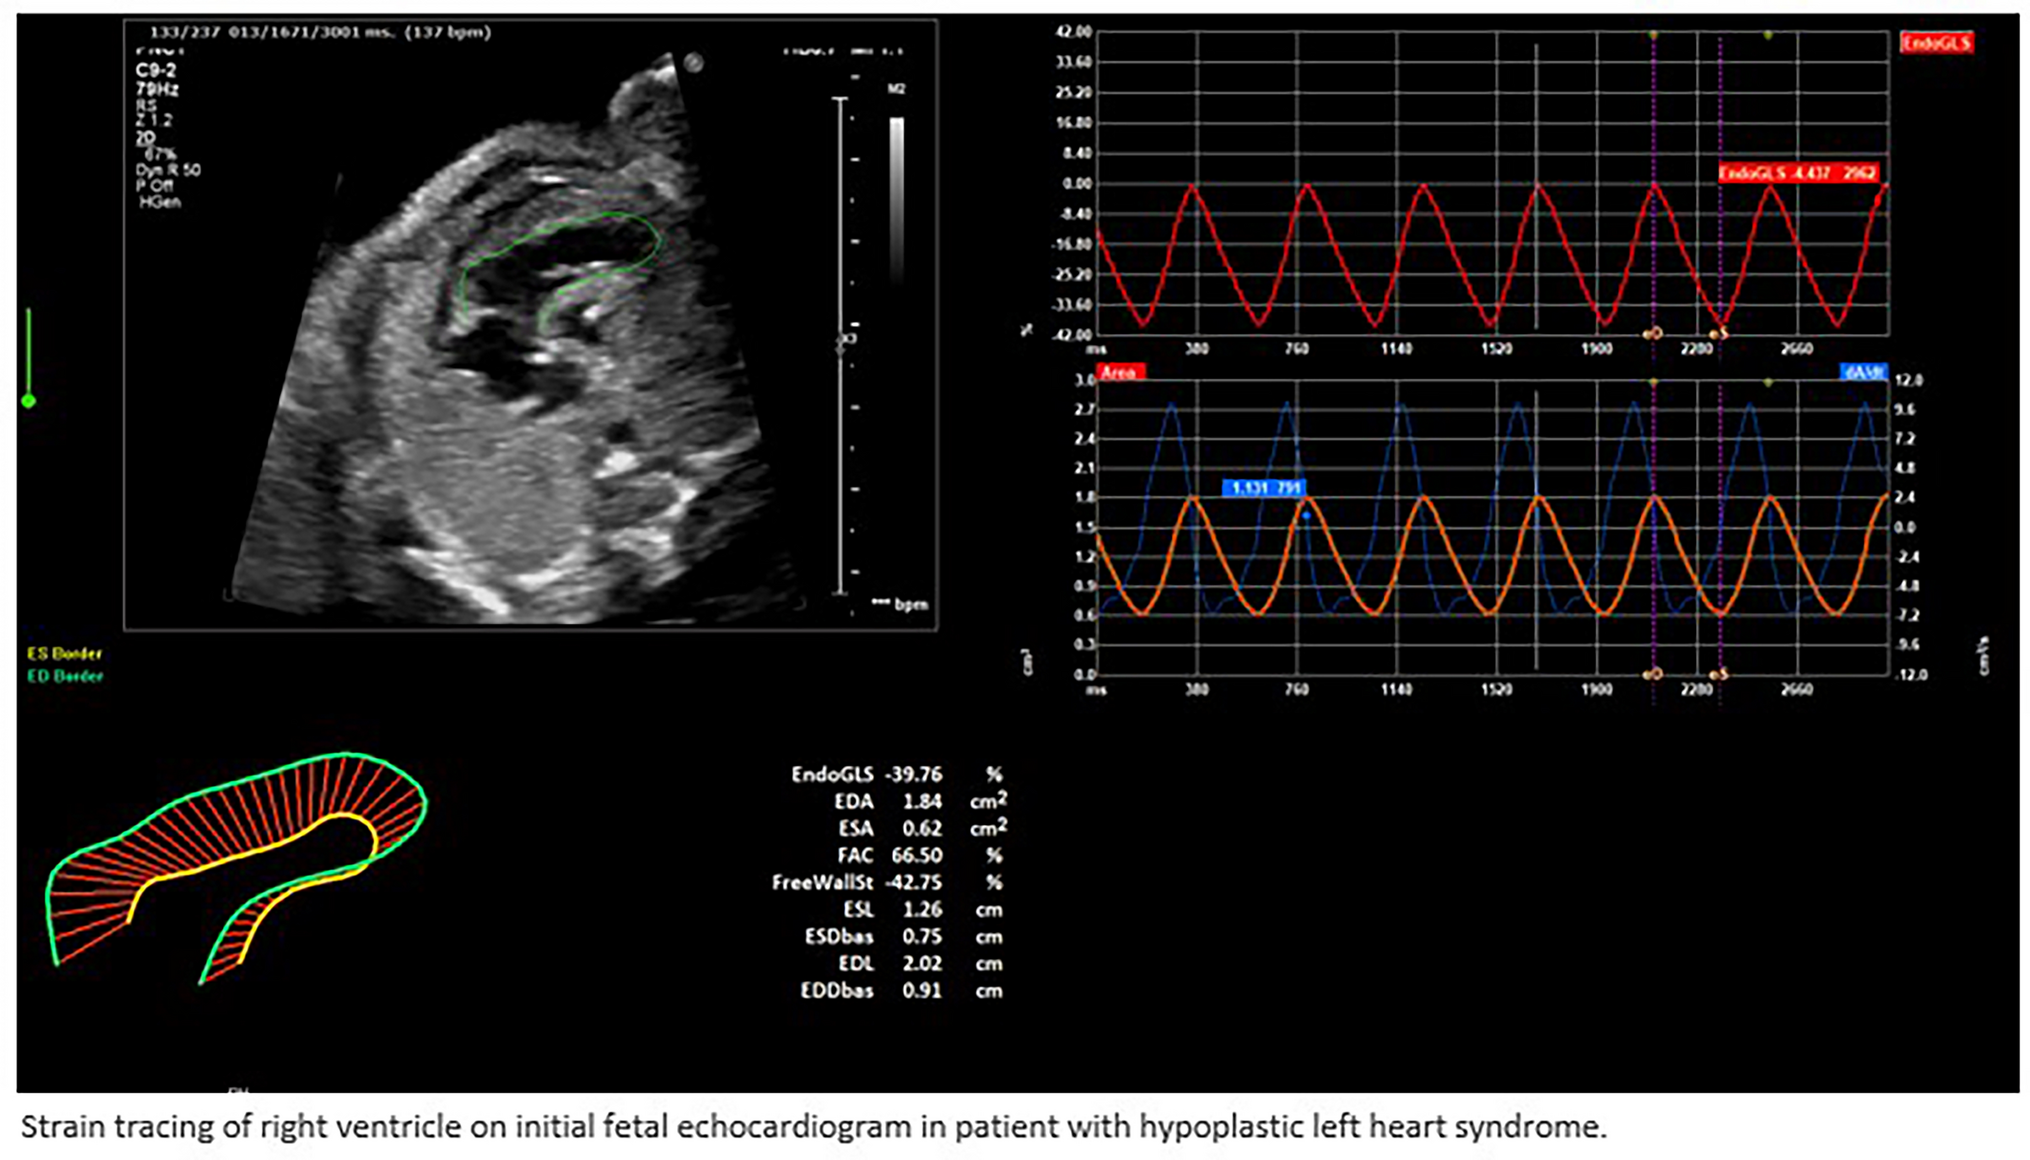 Fetal Echocardiographic Evaluation of Tricuspid Valve and Right Ventricular Function Including Global Longitudinal Strain in Hypoplastic Left Heart Syndrome and Association with Postnatal Outcomes